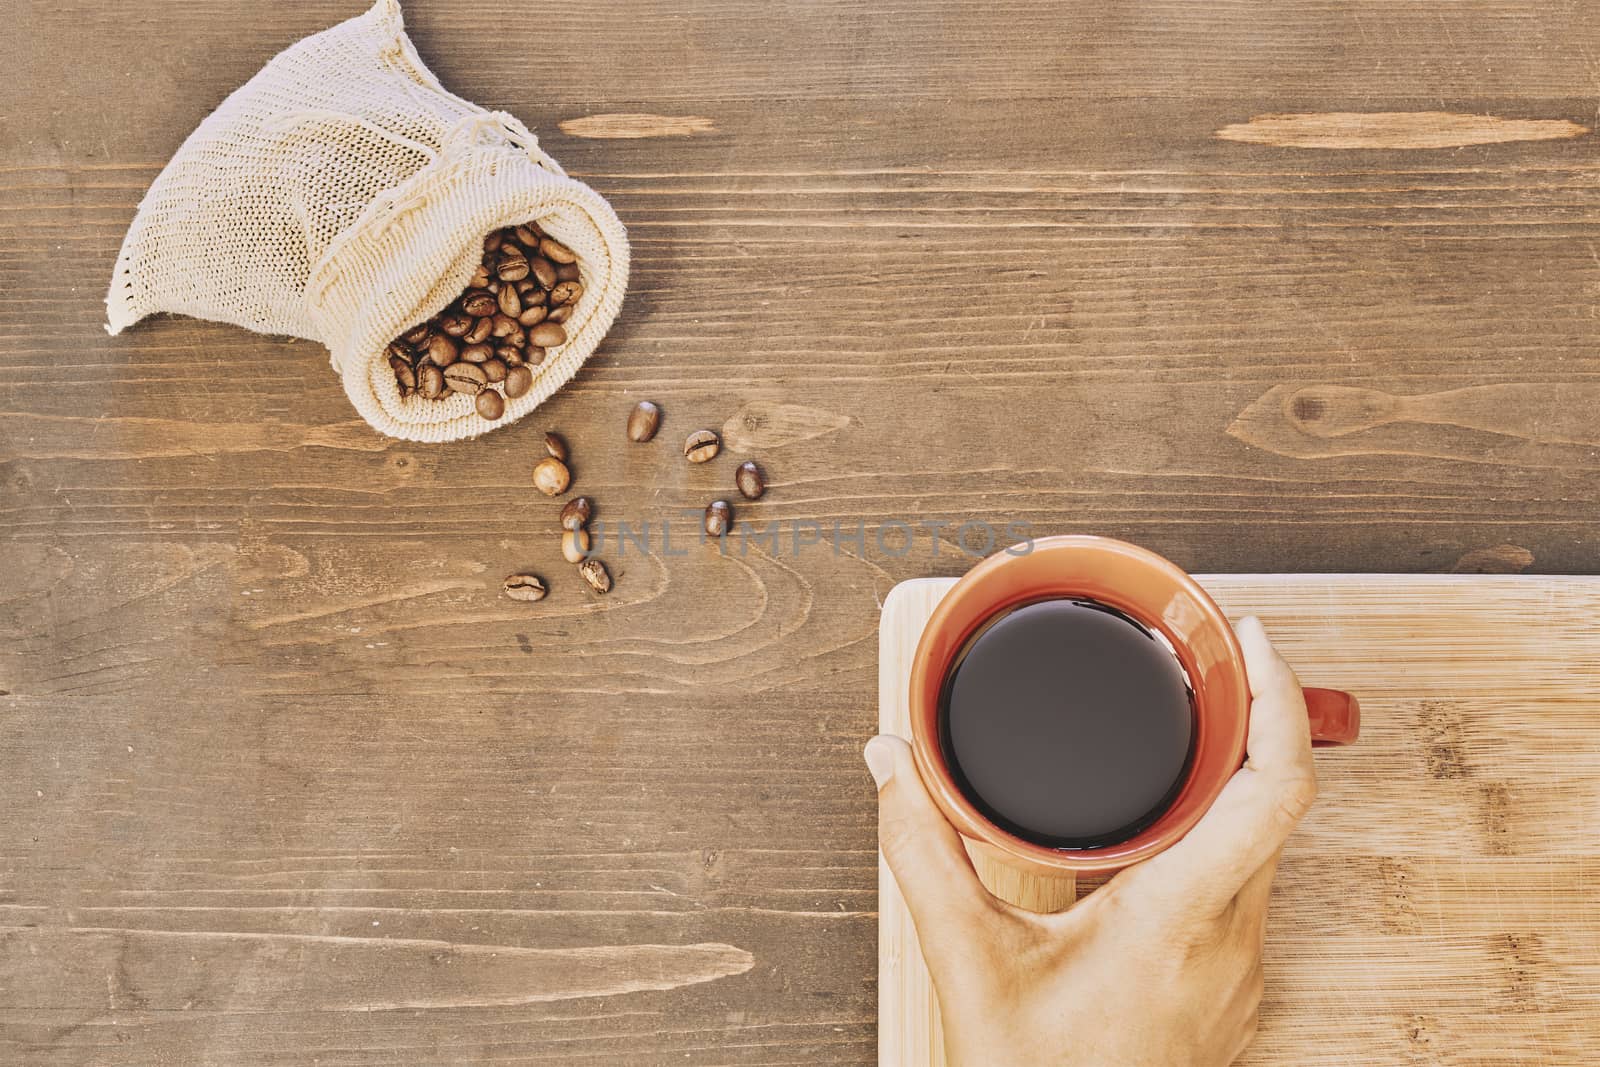 Top view of a person holding a cup of coffee with roasted coffee beans in a small sack on the table